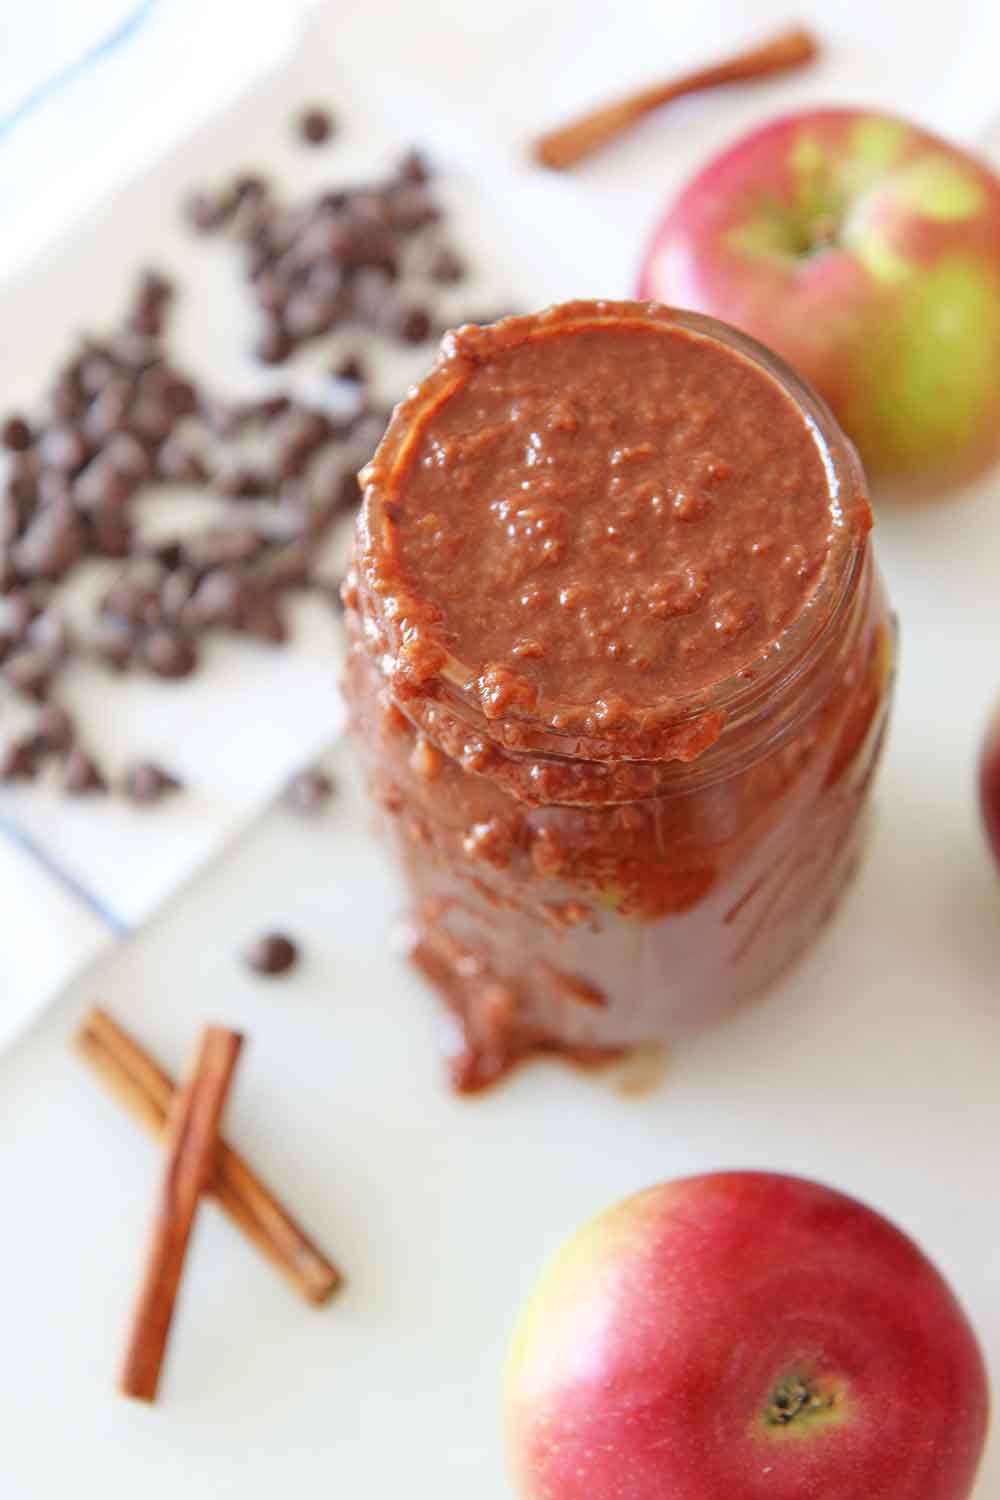 How to Make Chocolate Applesauce in a Slow Cooker.Apples, butter, brown sugar, cinnamon, orange juice, and salt are all you need. This is an easy slow cooker recipe for fall or Hanukkah. Happy apple cooking! www.ChopHappy.com #applerecipes #applesauce